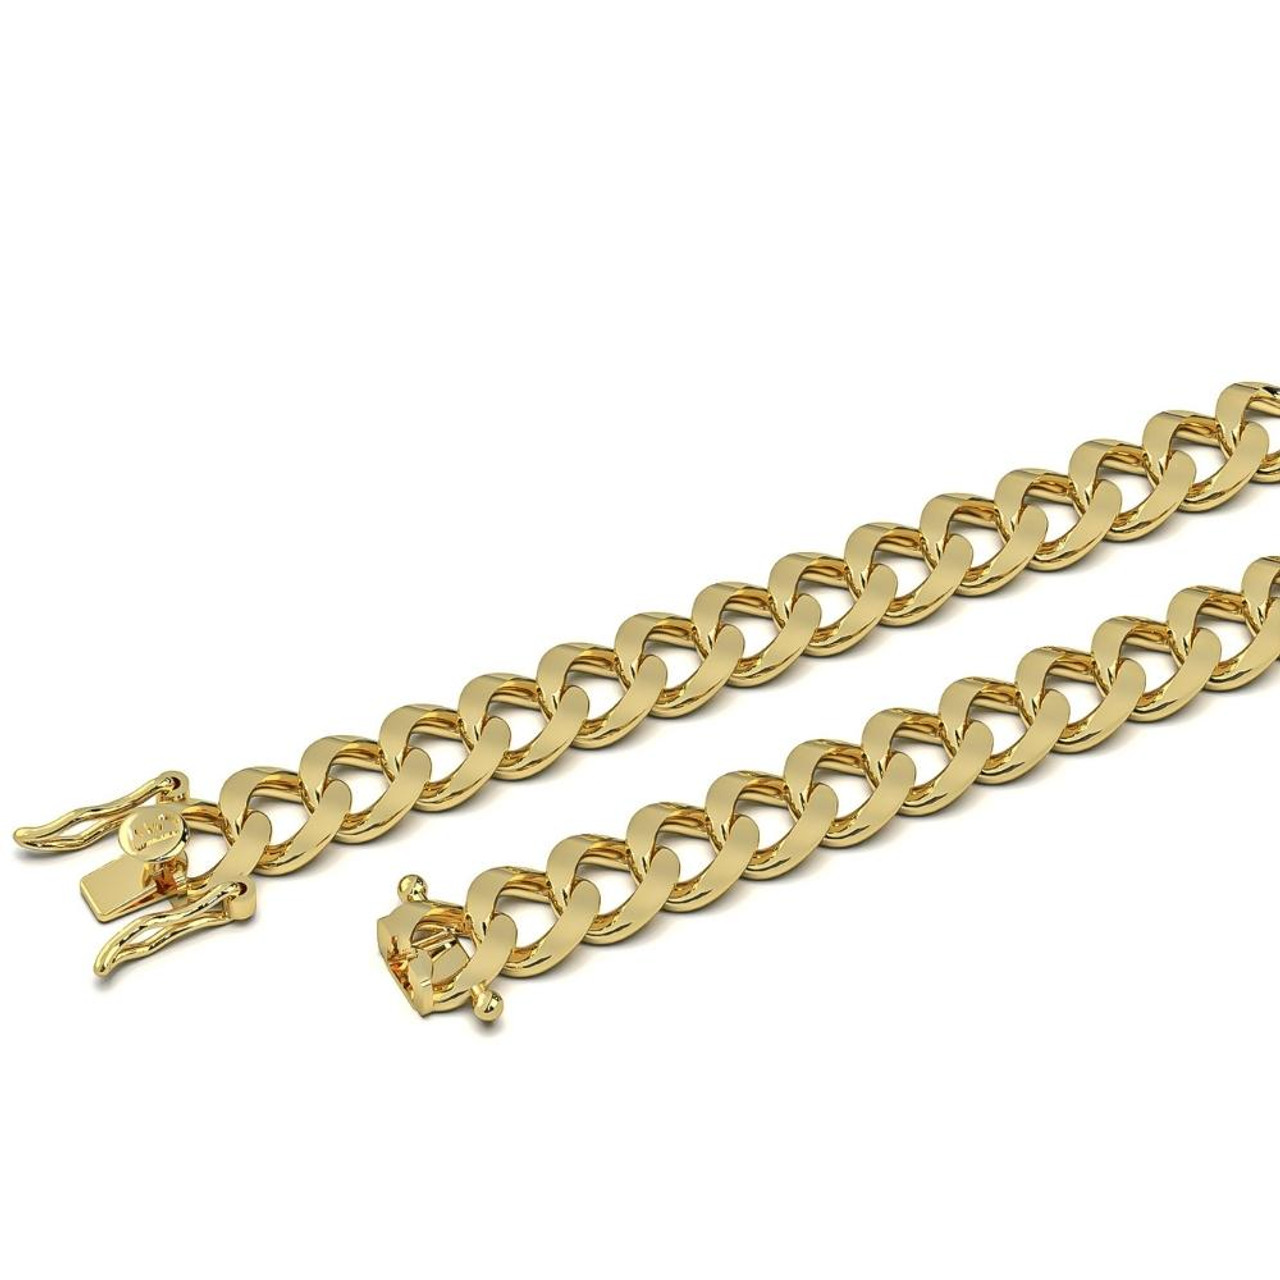 Made in Italy 4.2mm Double Rope Chain Bracelet in 14K Gold - 7.5